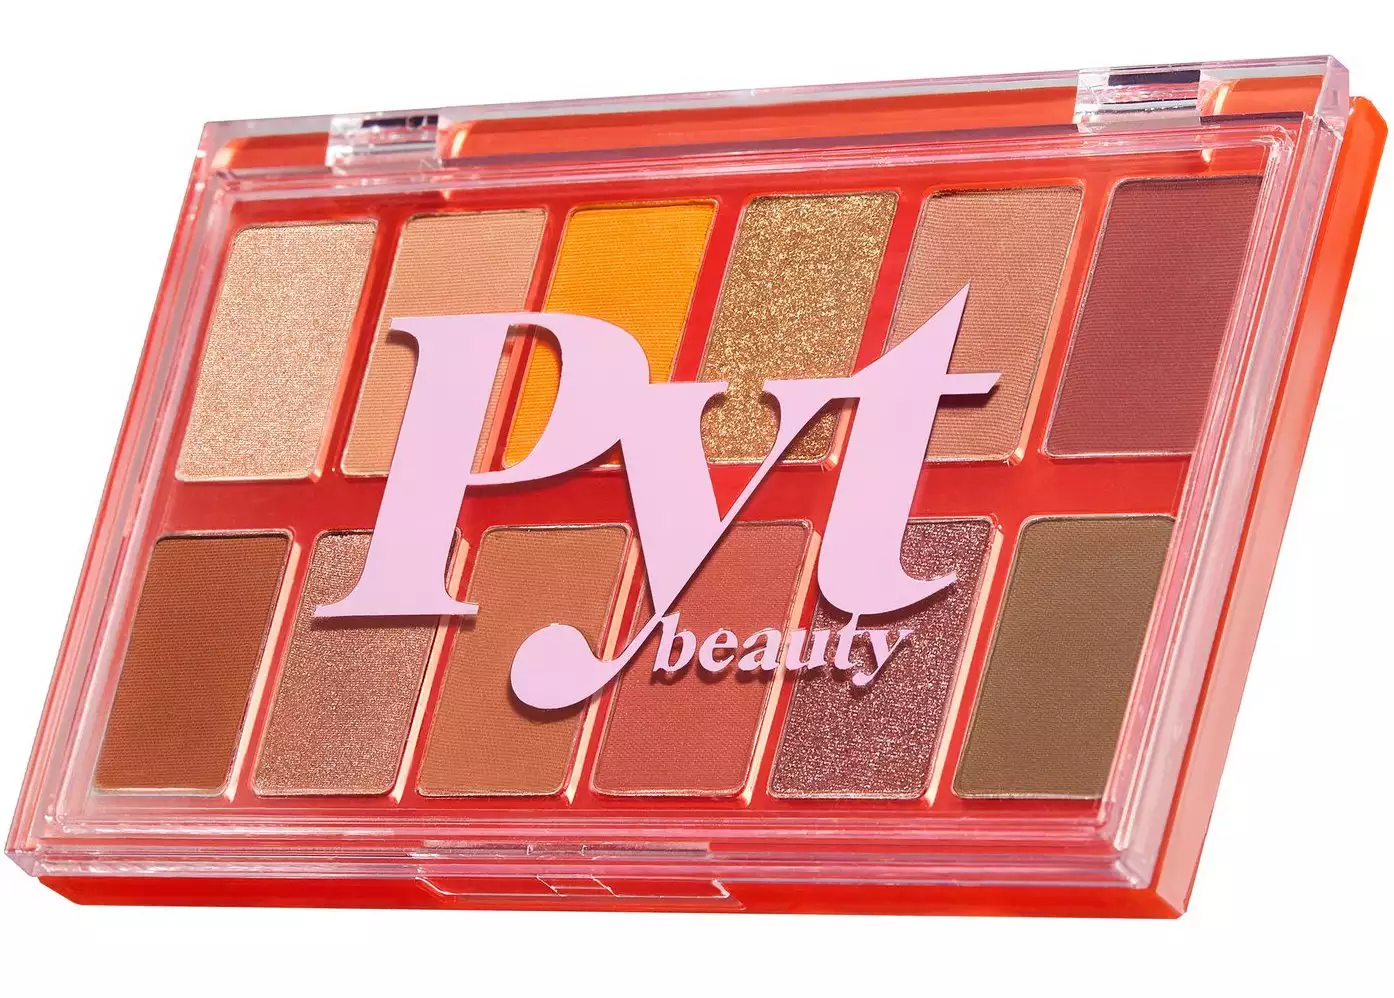 PYT Beauty the Upcycle Eyeshadow Palette in Warm Lit Nude